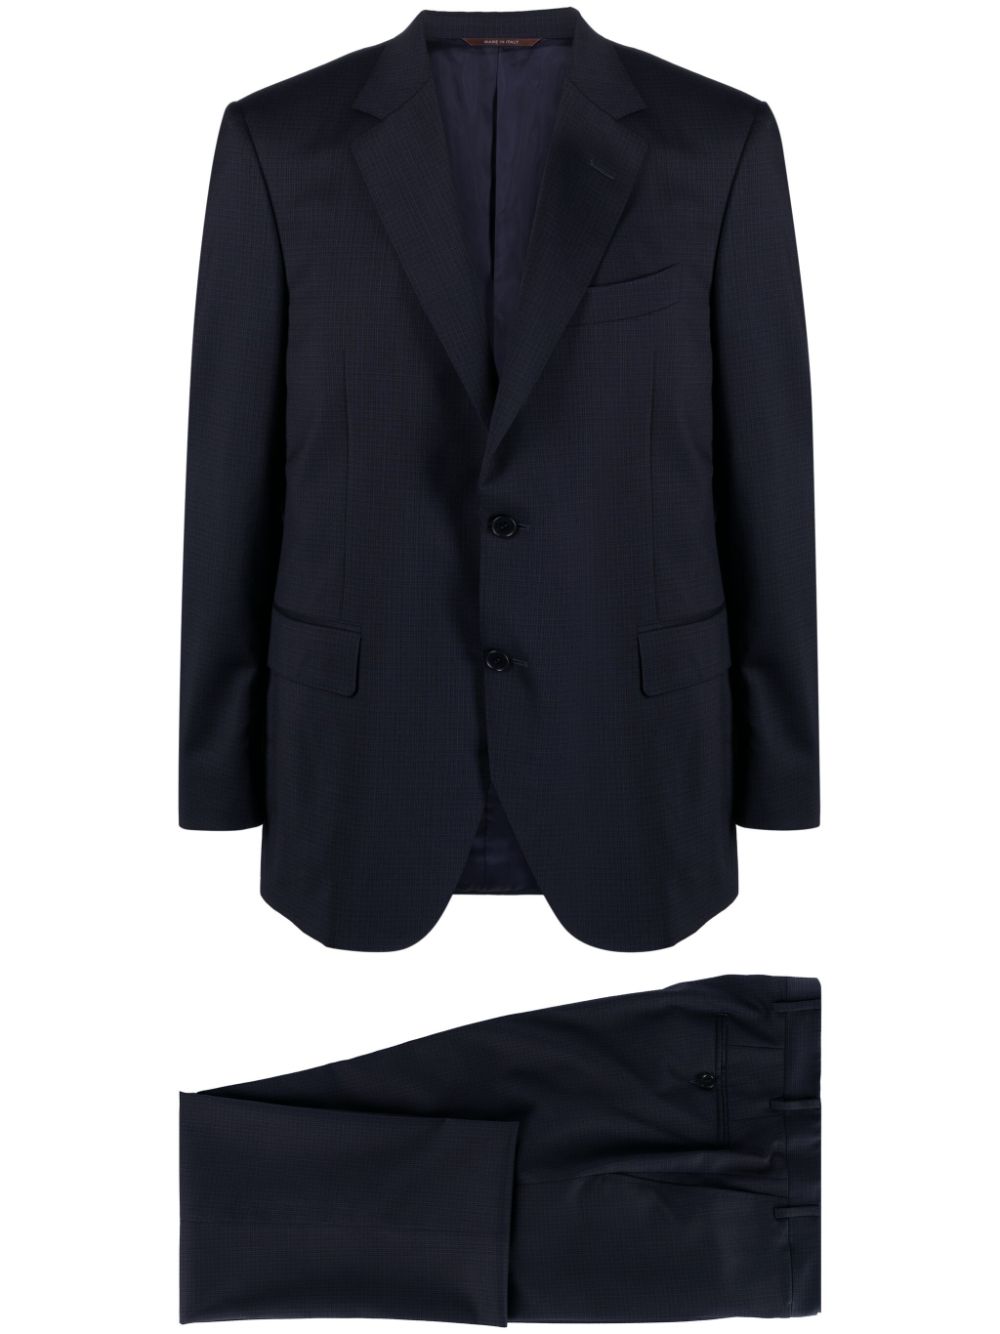 CANALI FINE CHECK-PRINT SINGLE-BREASTED SUIT